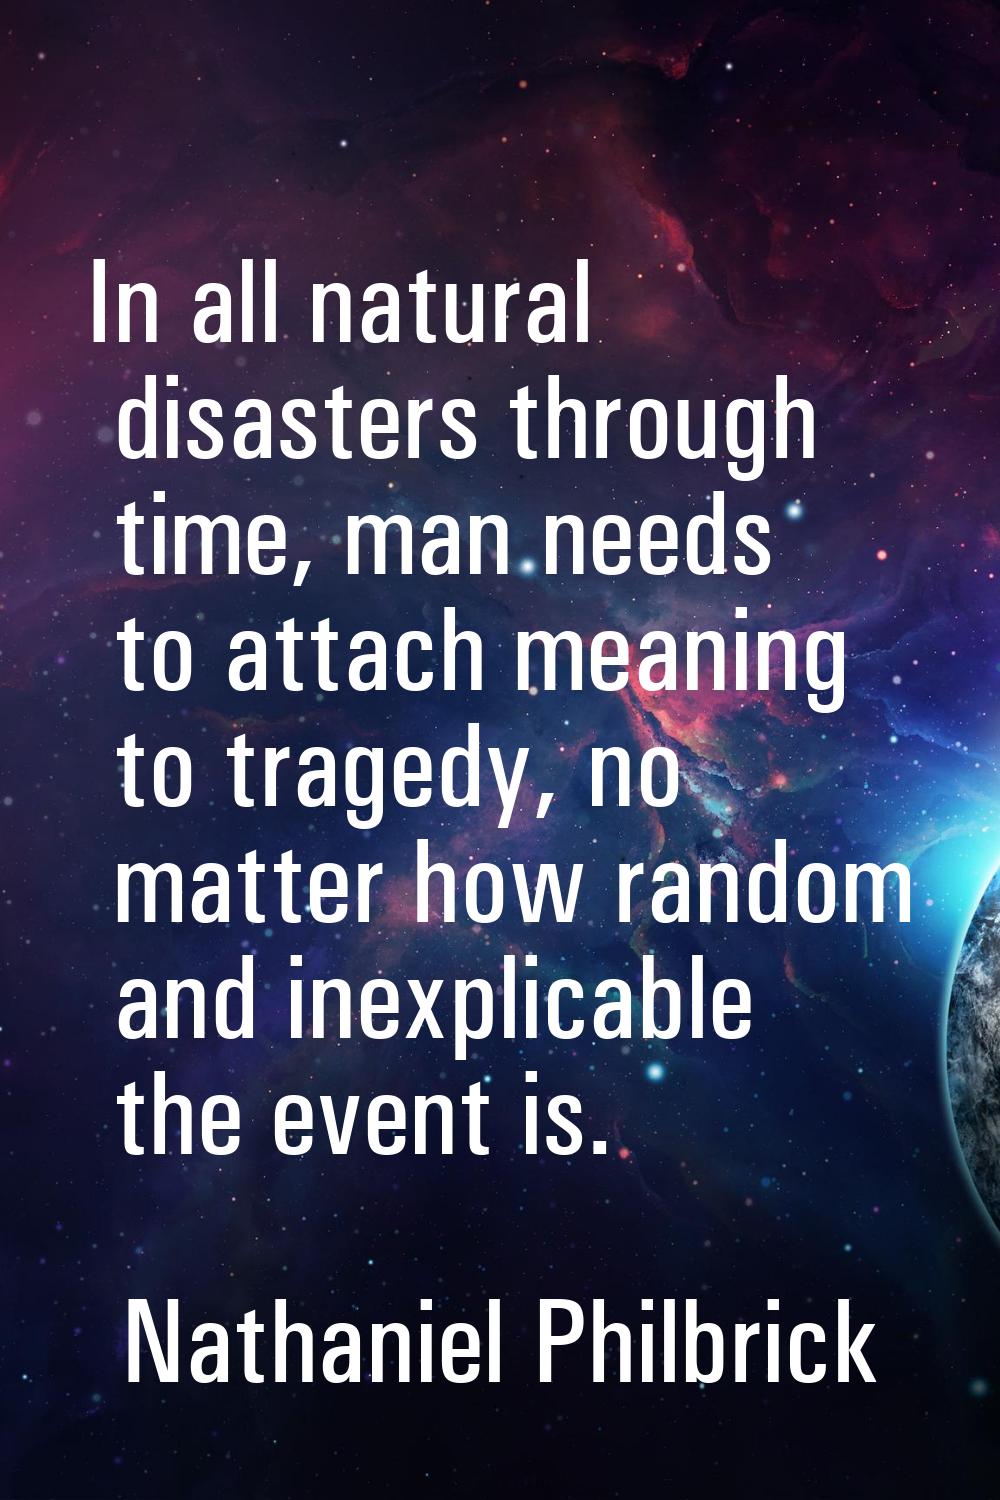 In all natural disasters through time, man needs to attach meaning to tragedy, no matter how random